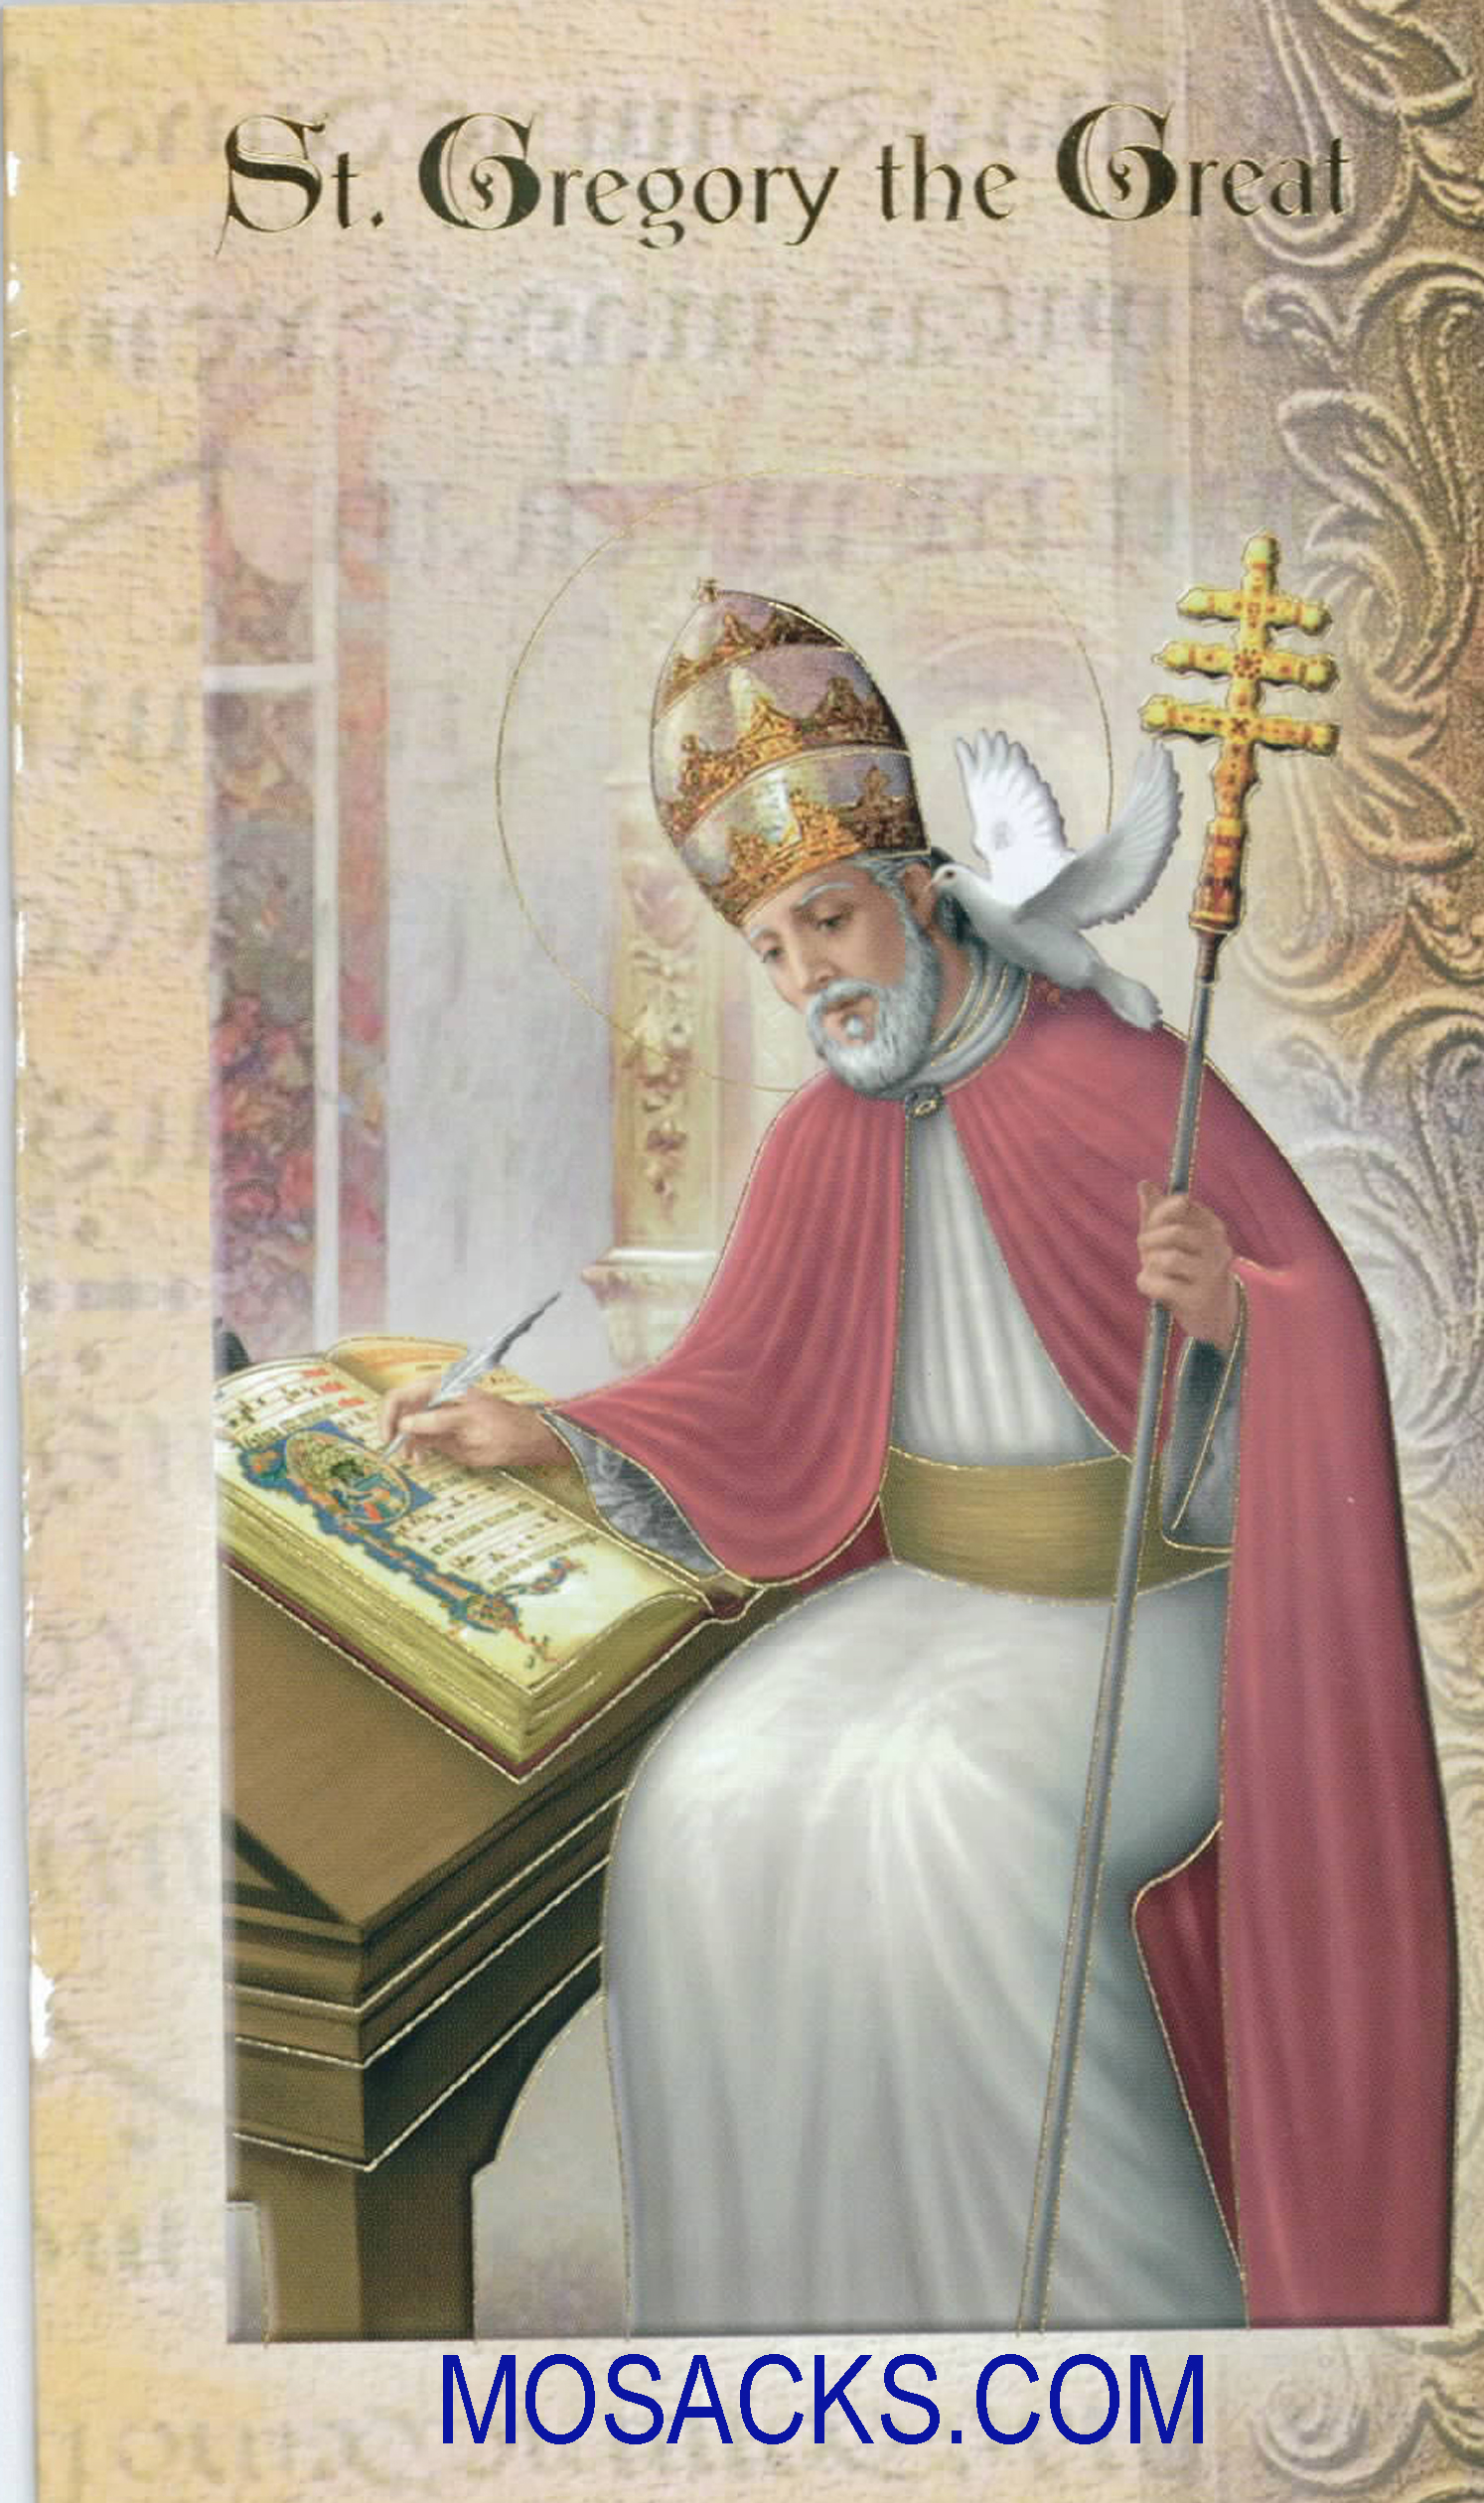 St. Gregory the Great Laminated Bi-fold Holy Card, F5-443